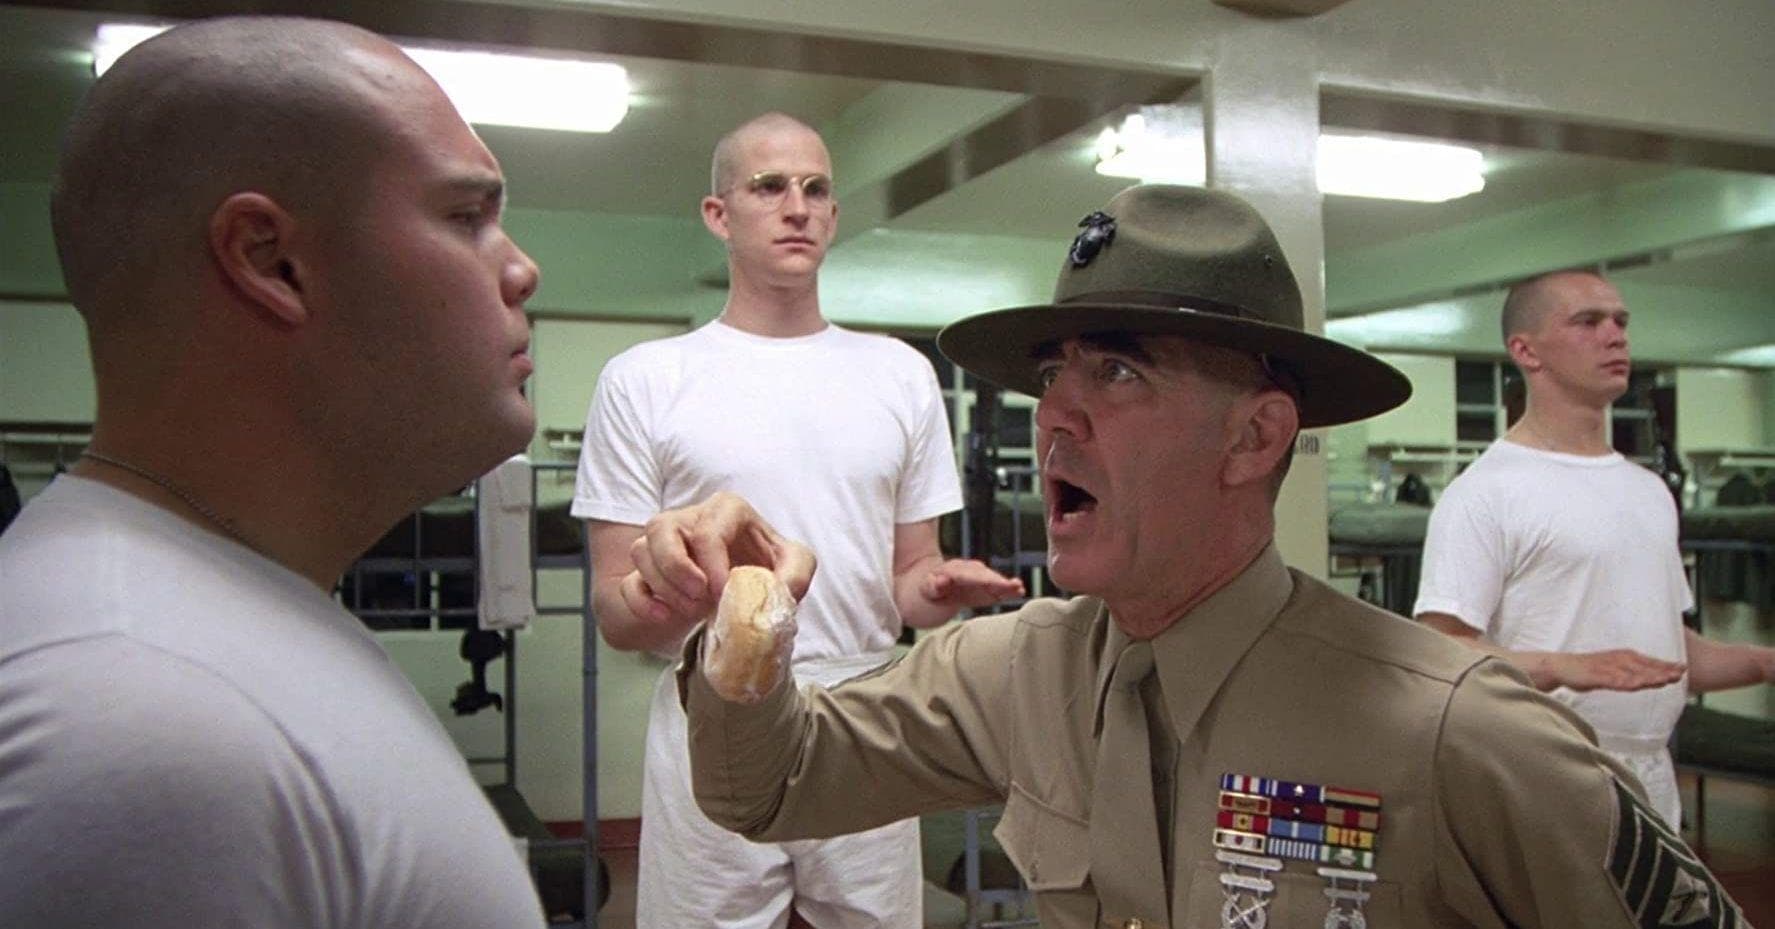 Behind The Scenes Stories From The Making Of 'Full Metal Jacket'